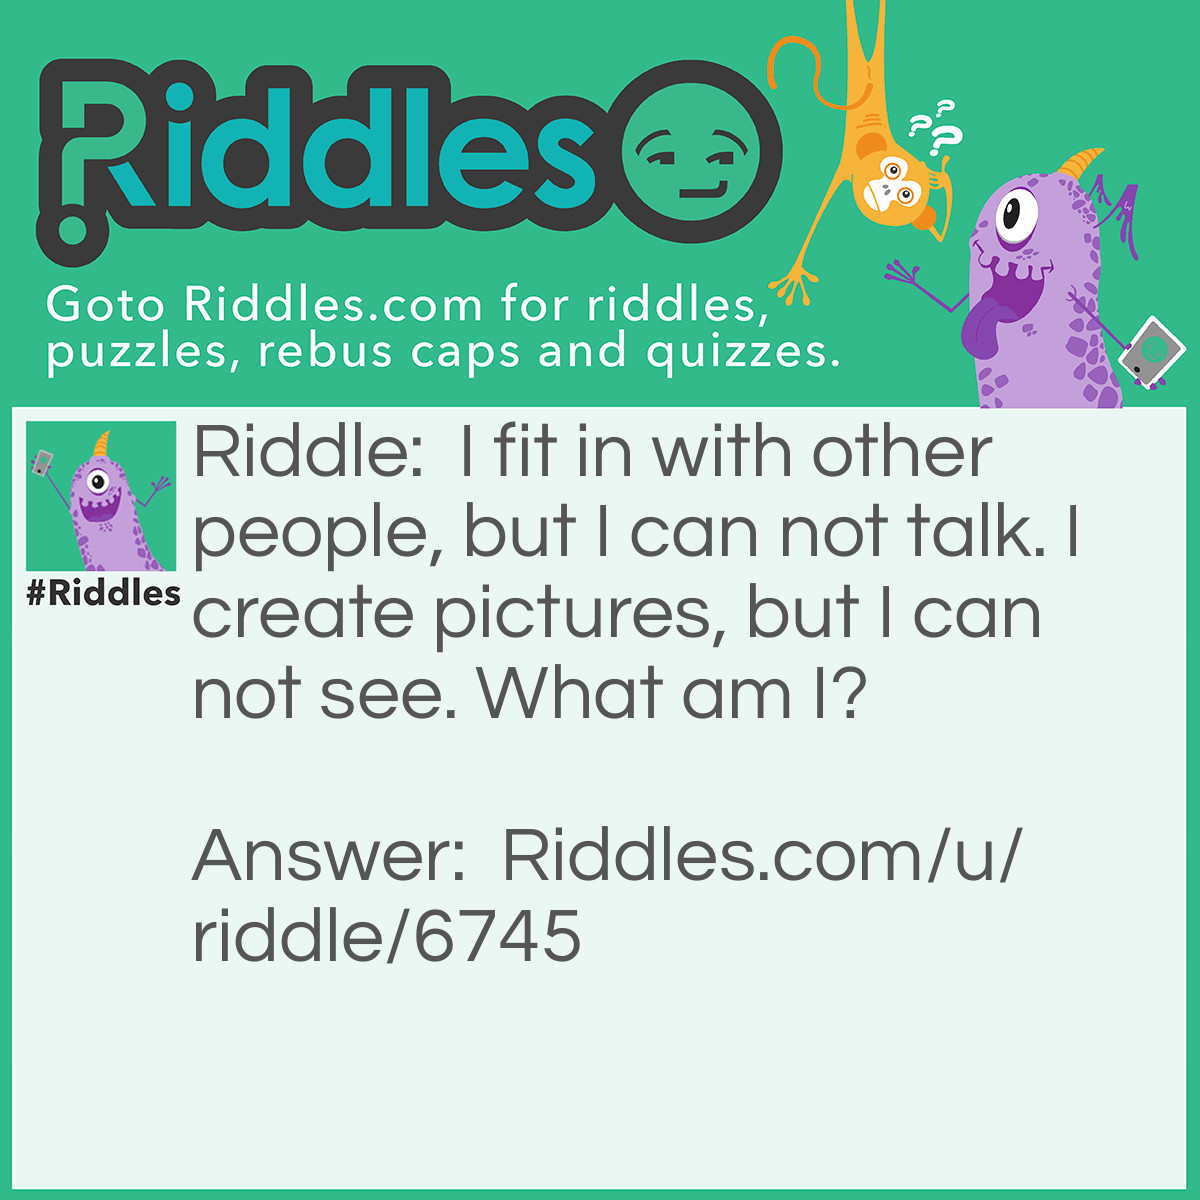 Riddle: I fit in with other people, but I can not talk. I create pictures, but I can not see. What am I? Answer: A puzzle piece.